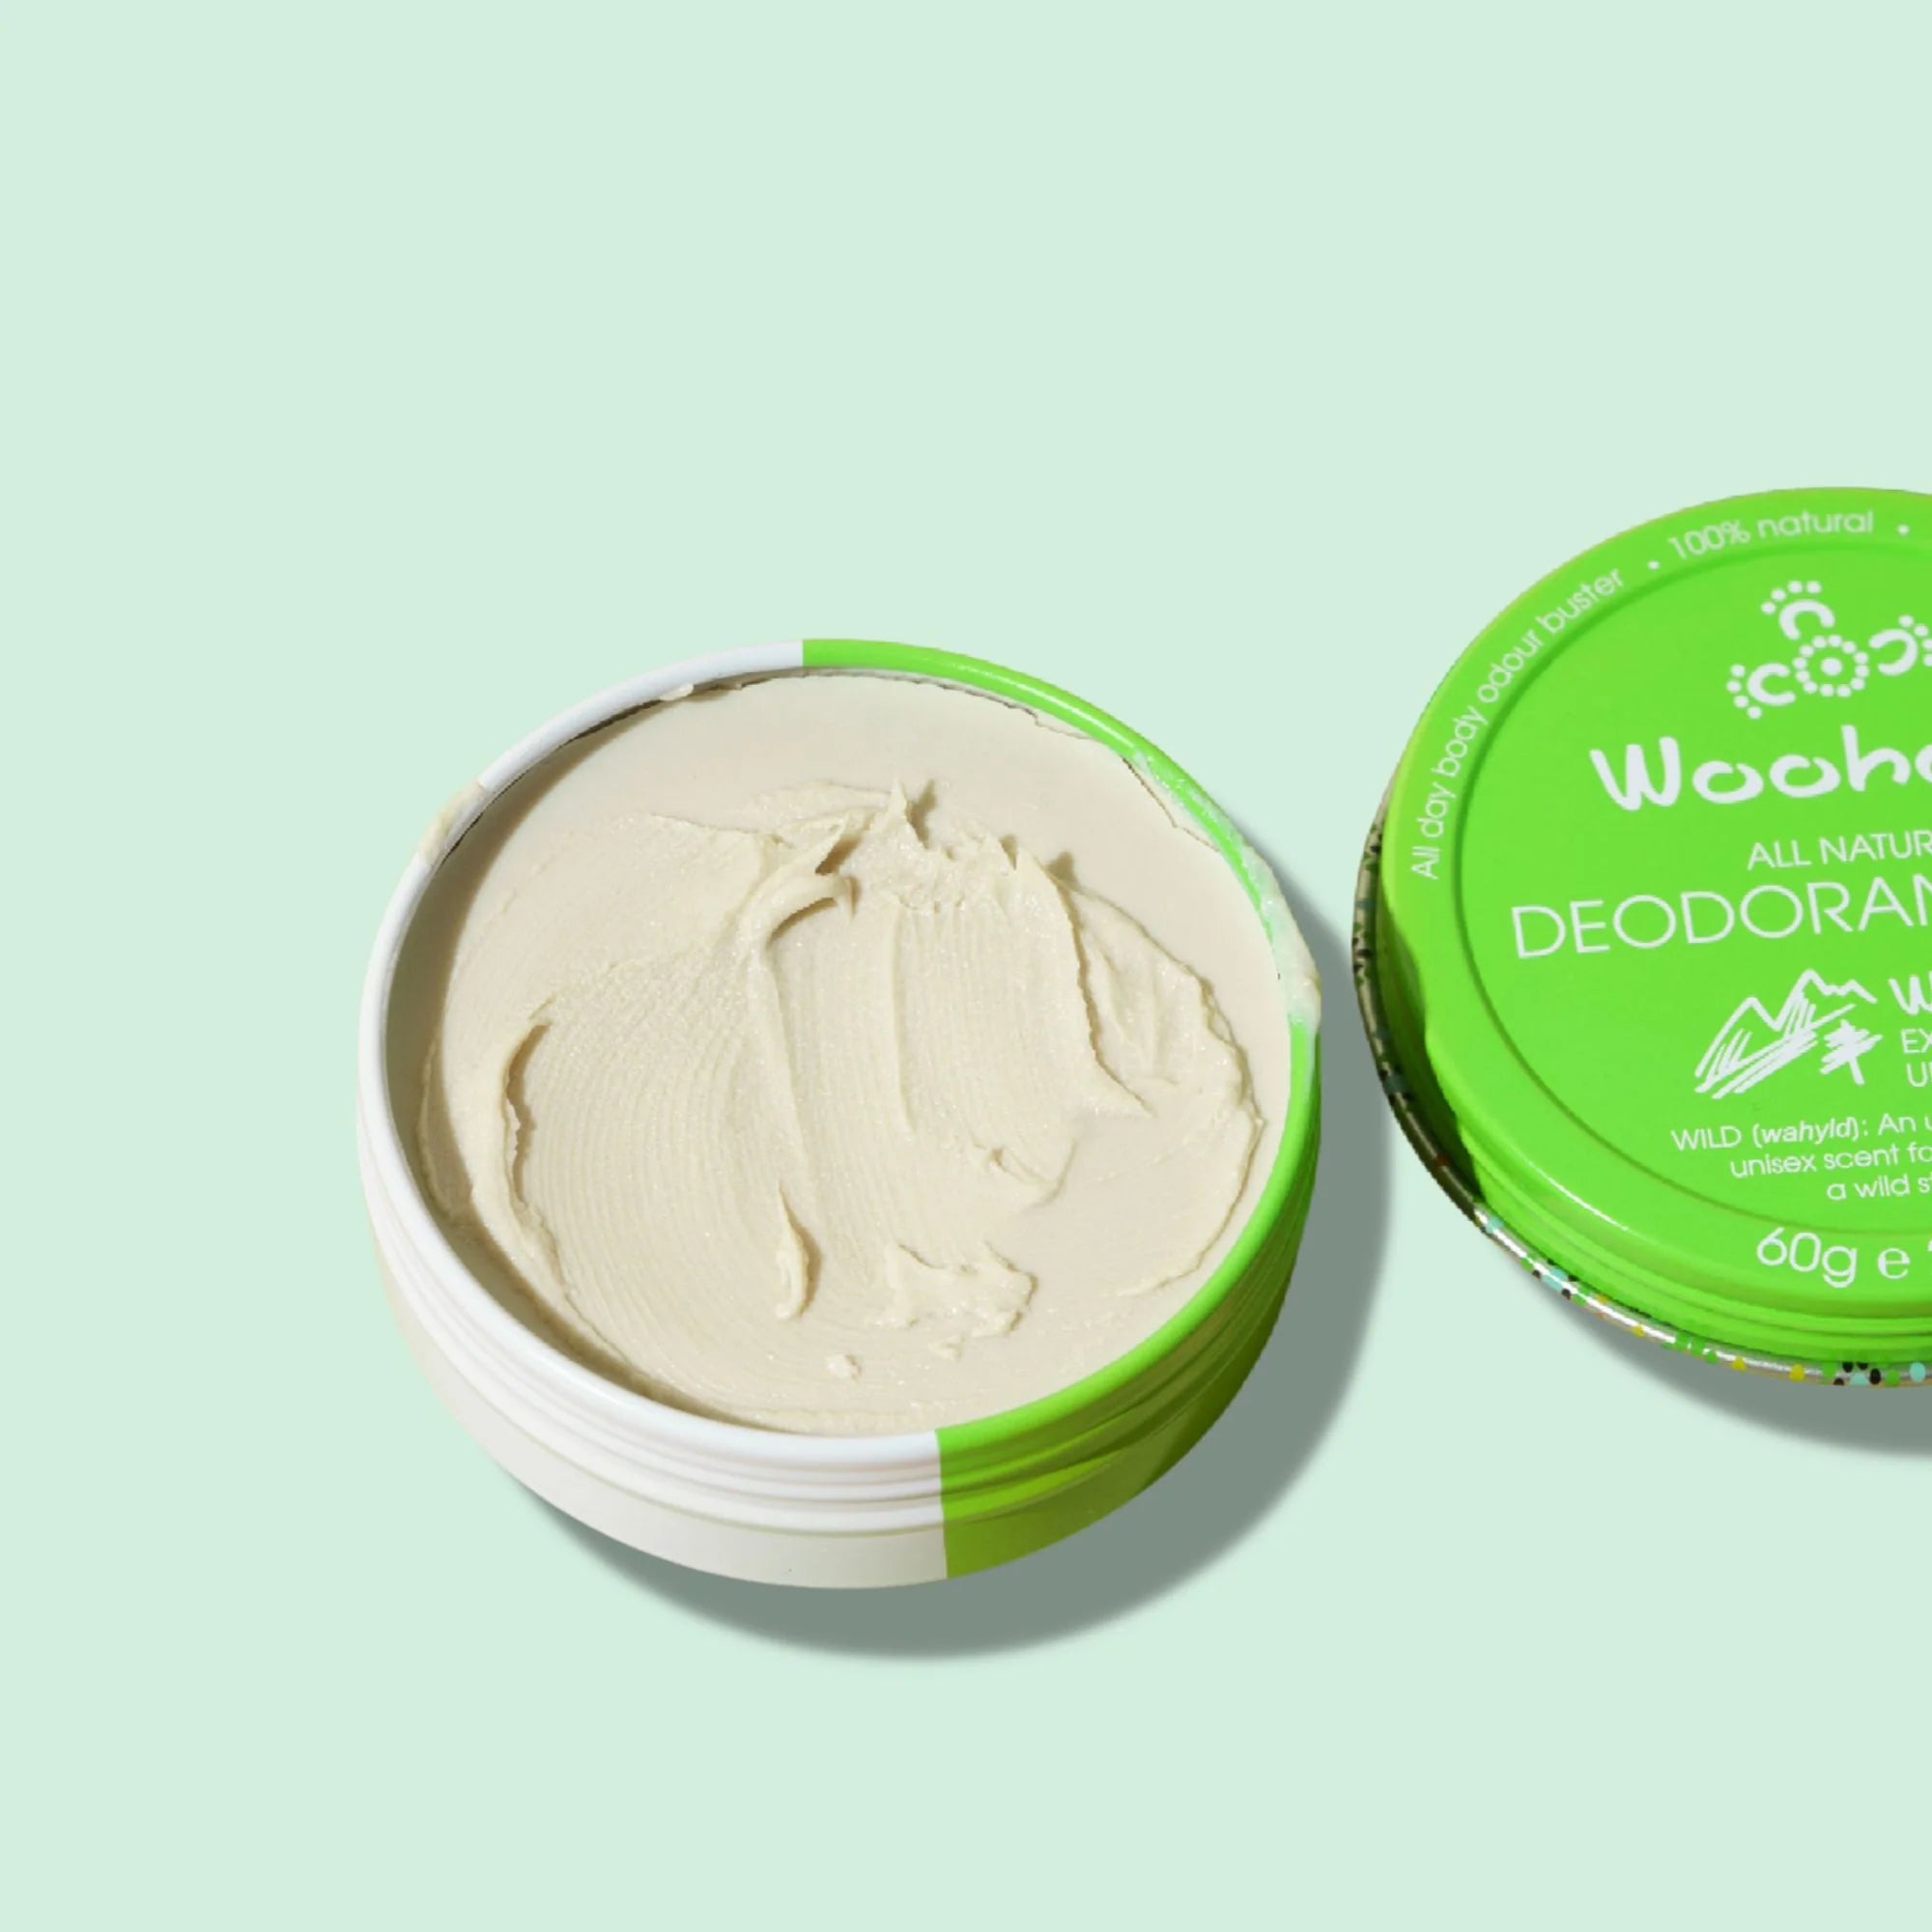 Image of an opened Woohoo Wild Natural Deodorant Paste tin with cap next to it on a light green background